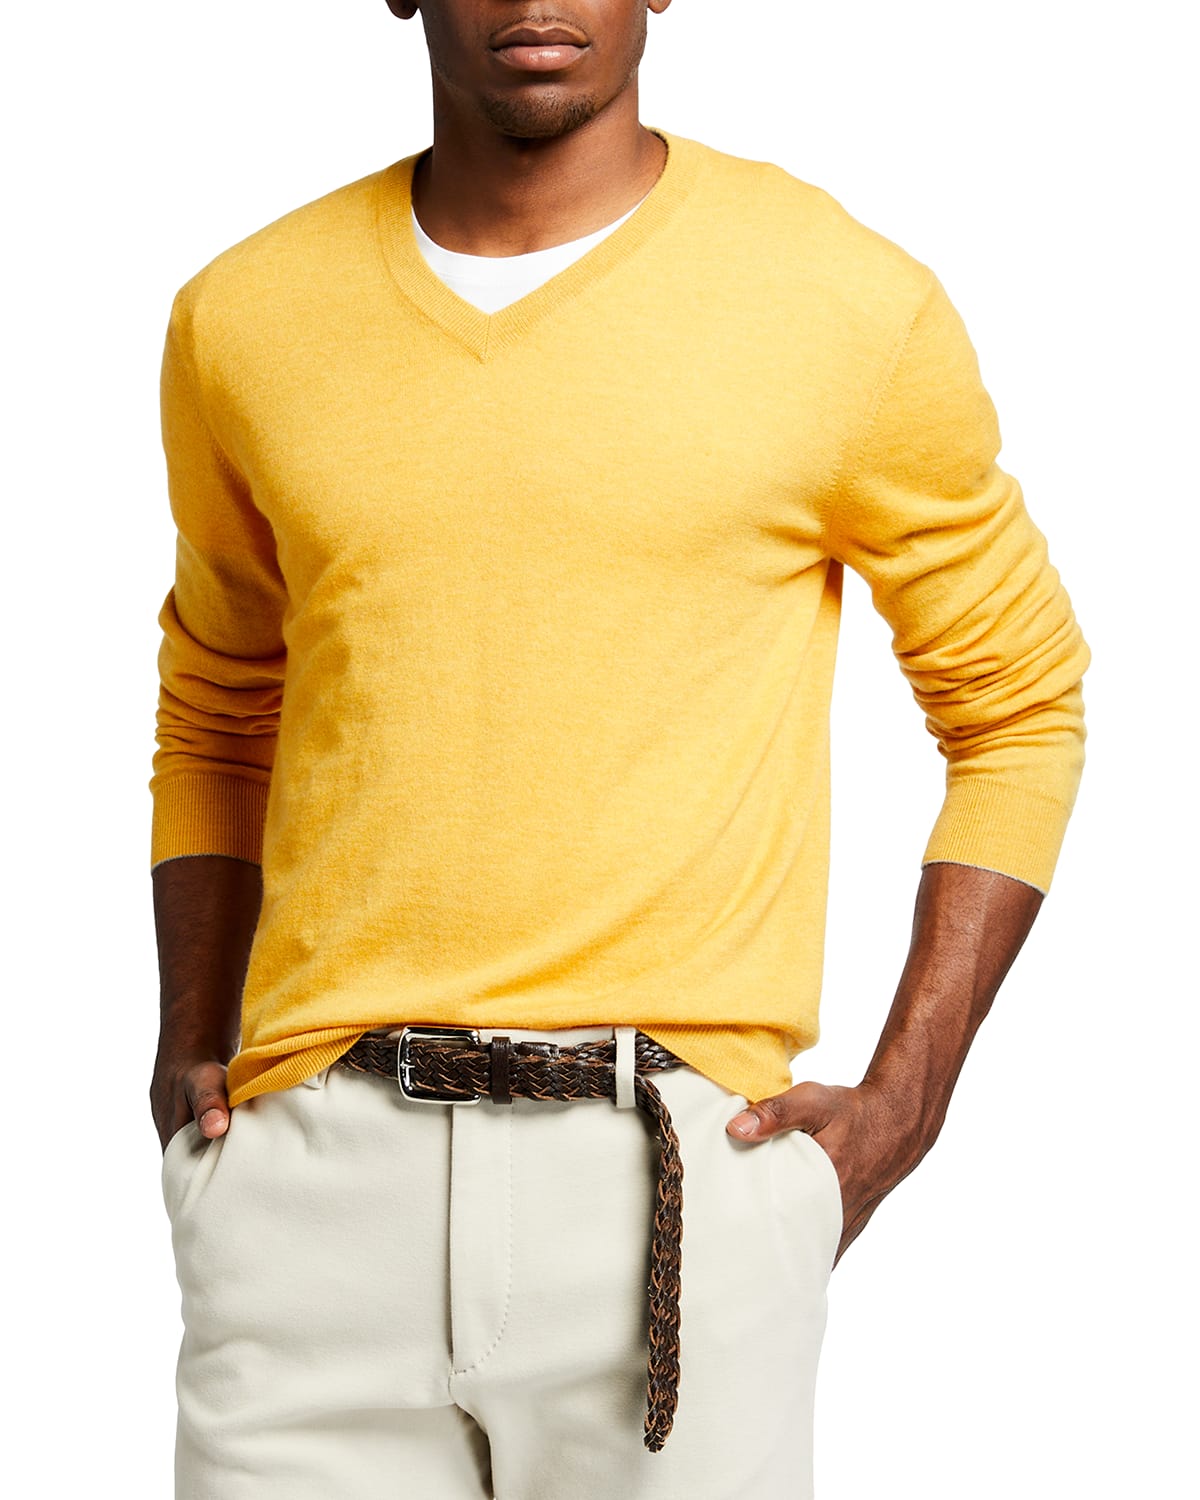 MENS PLAIN CLASSIC YELLOW CARDIGAN JUMPER FITTED BUTTON UP VNECK SLIM SWEATER 